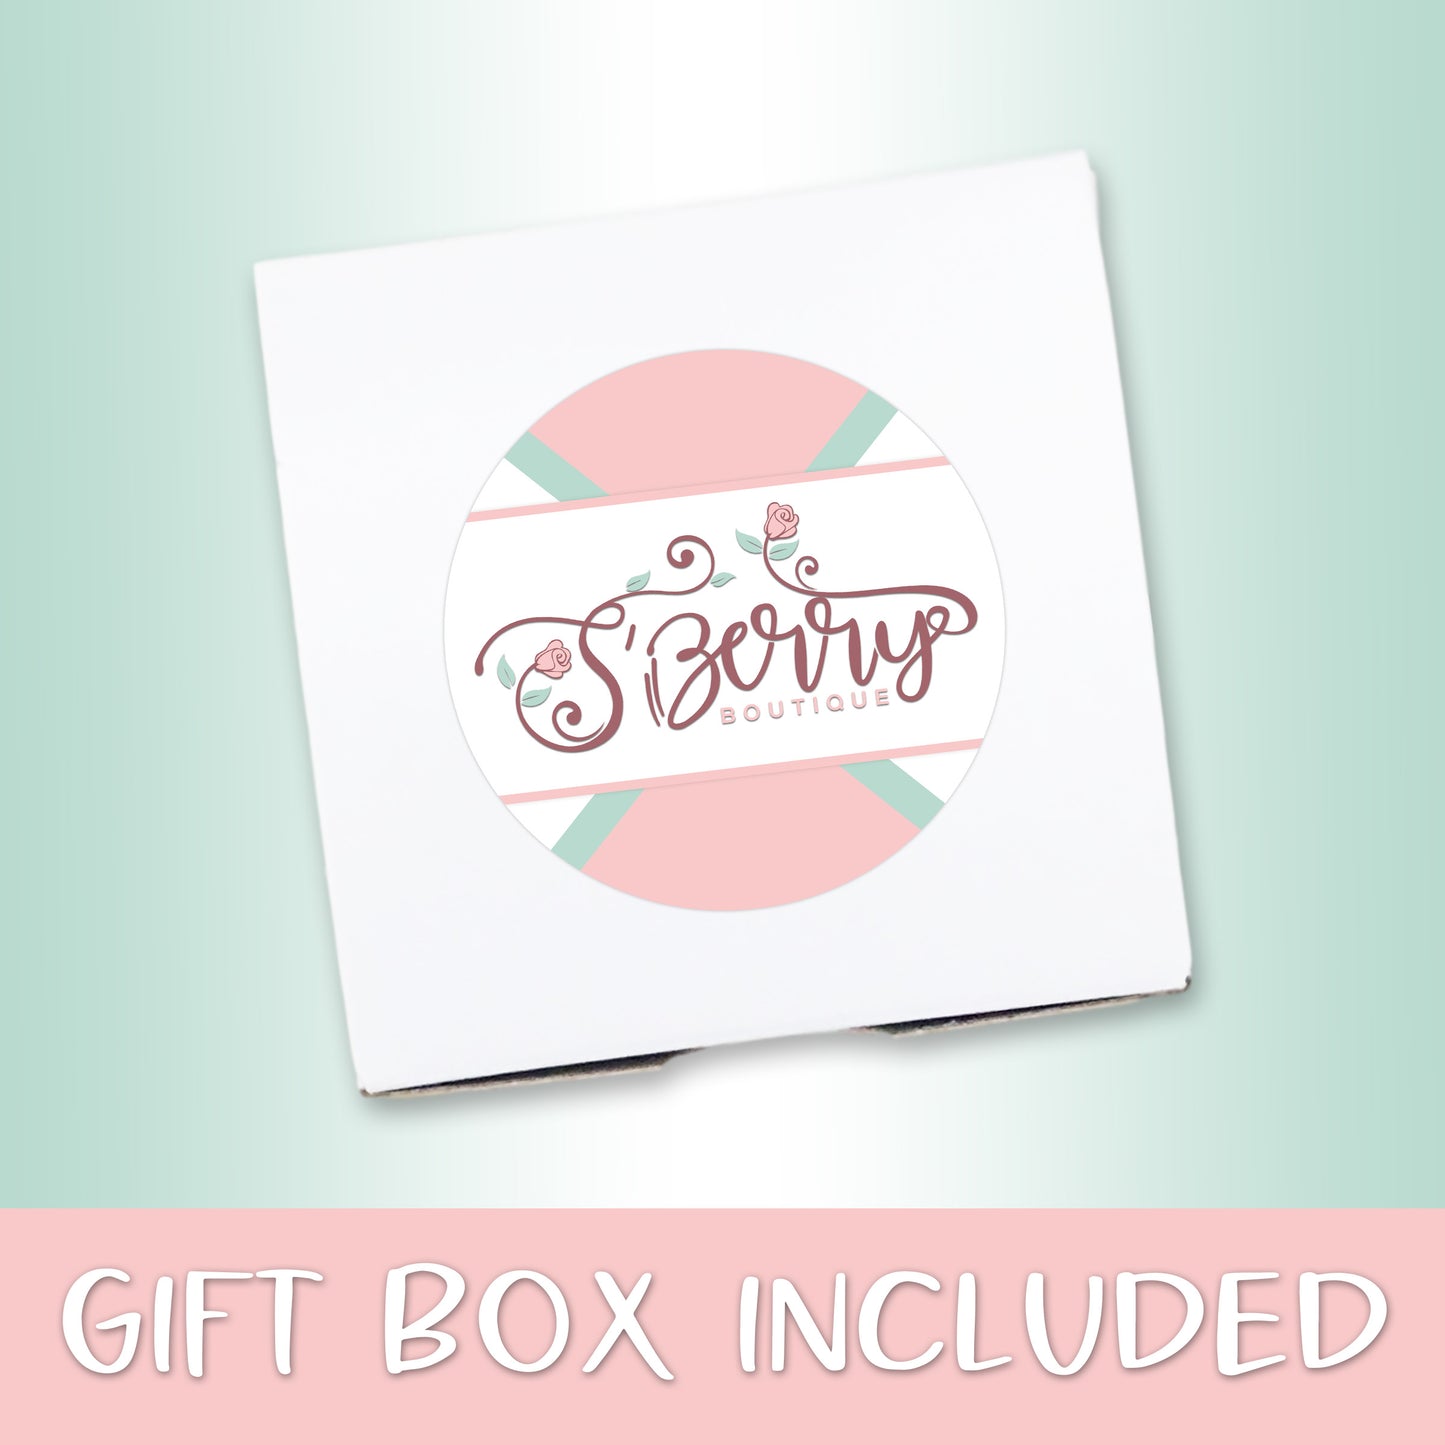 Create Your Own Puzzle - Fishing Design - CYOP0012 | S'Berry Boutique